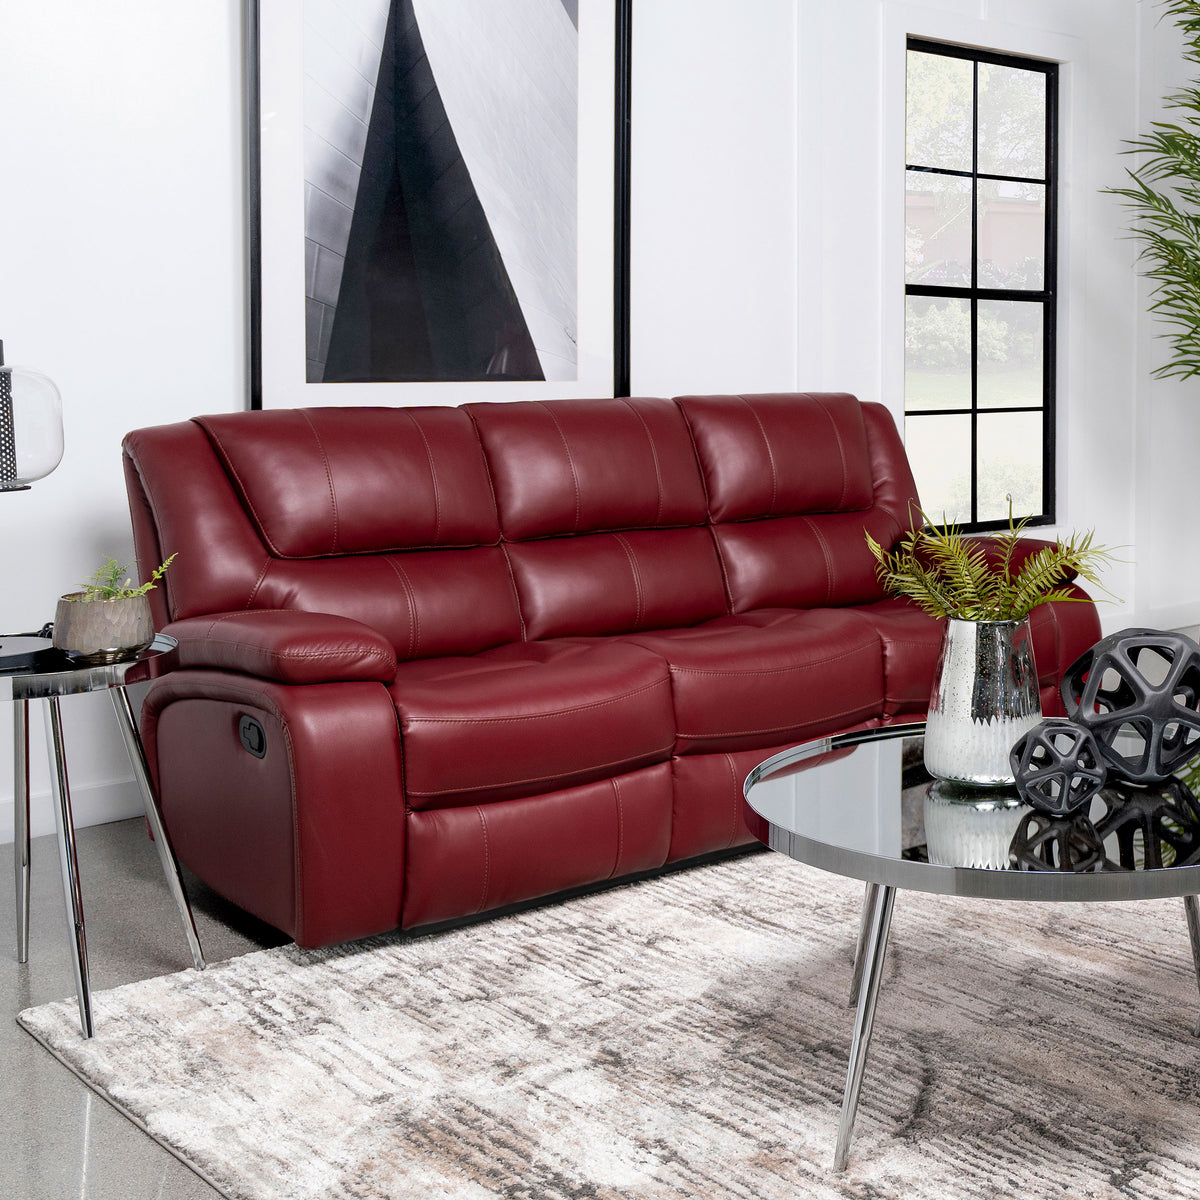 Camila Upholstered Motion Reclining Sofa Red Faux Leather Camila Upholstered Motion Reclining Sofa Red Faux Leather Half Price Furniture